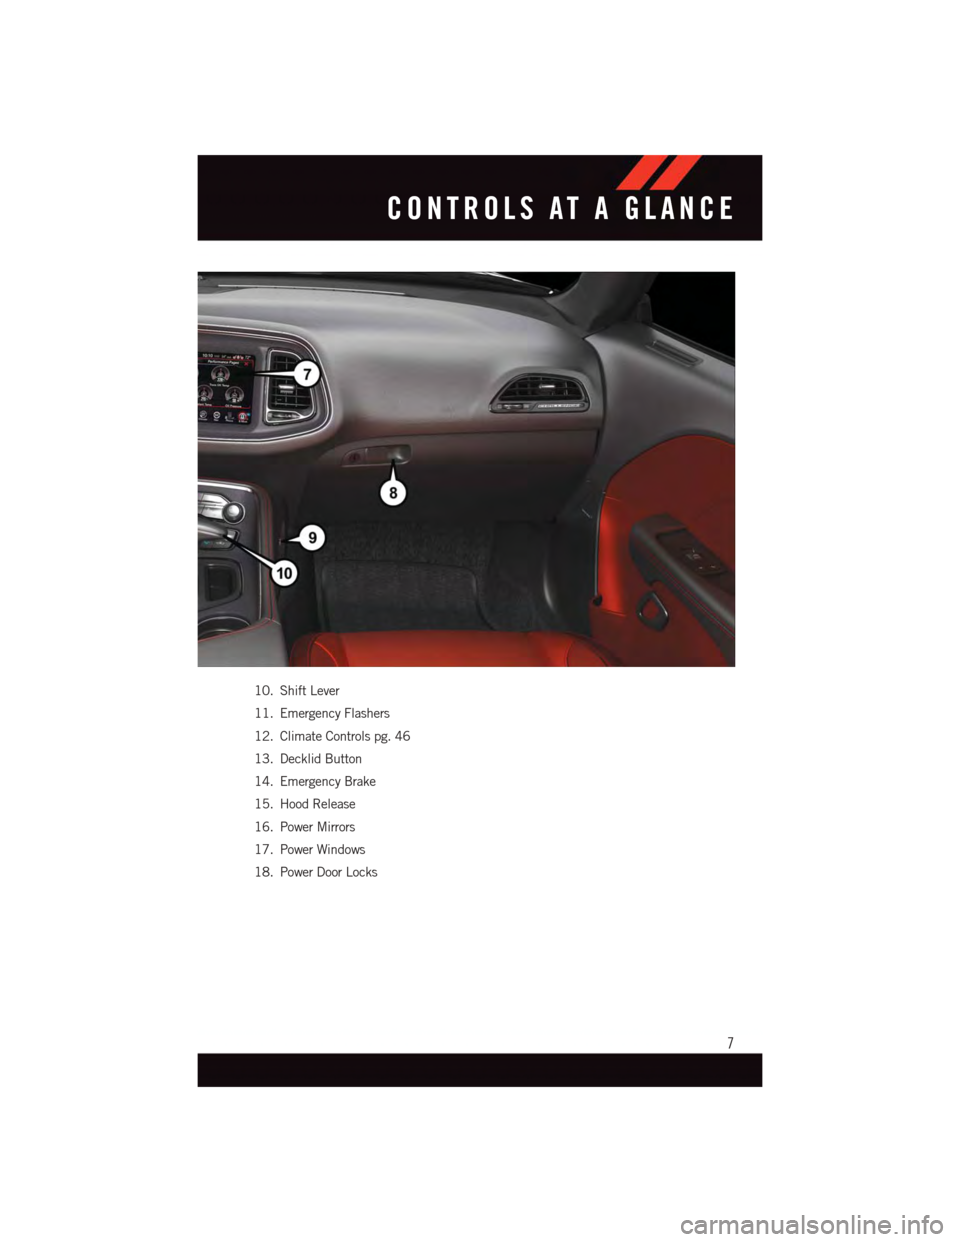 DODGE CHALLENGER 2015 3.G User Guide 10. Shift Lever
11. Emergency Flashers
12. Climate Controls pg. 46
13. Decklid Button
14. Emergency Brake
15. Hood Release
16. Power Mirrors
17. Power Windows
18. Power Door Locks
CONTROLS AT A GLANCE